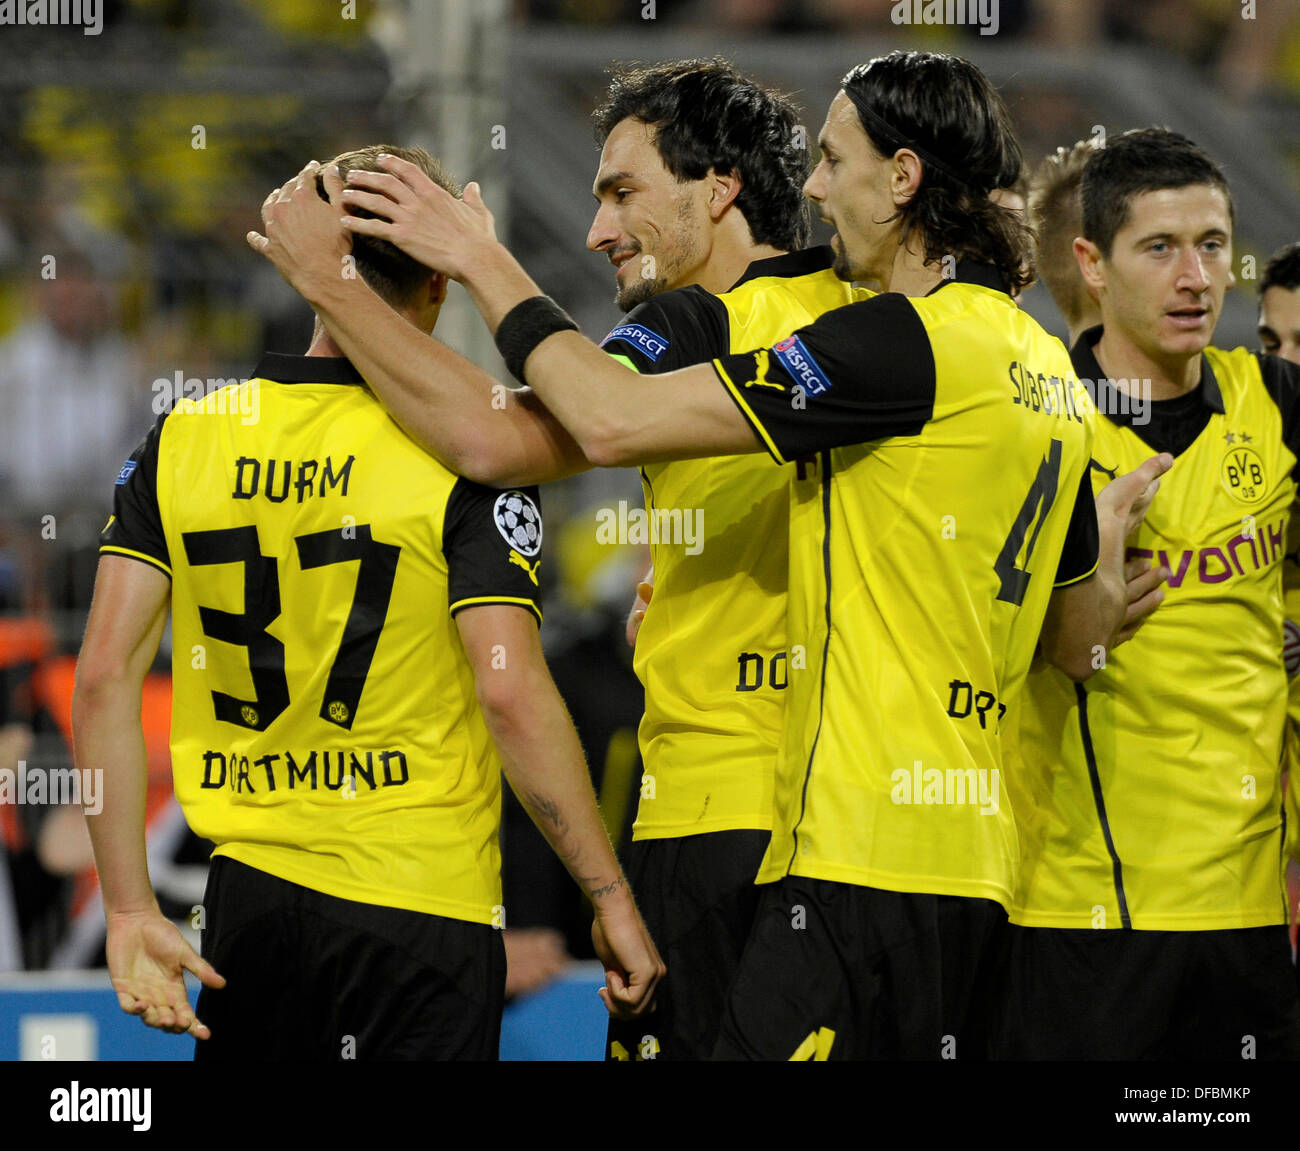 Dortmund, Germany . 01st Oct, 2013. UEFA Champions League 2013/14, 1.10.2013, Group phase, 2nd matchday, Signal Iduna Arena, Dortmund, Borussia Dortmund- Olympique Marseille ---- Mats Hummels (2nd.from left) and Neven Subotic congratulate Eric Durm in celebration of Durms assits for the goal of the 1:0, scored by Robert Lewandowski (right) , all Dortmund © kolvenbach/Alamy Live News Stock Photo